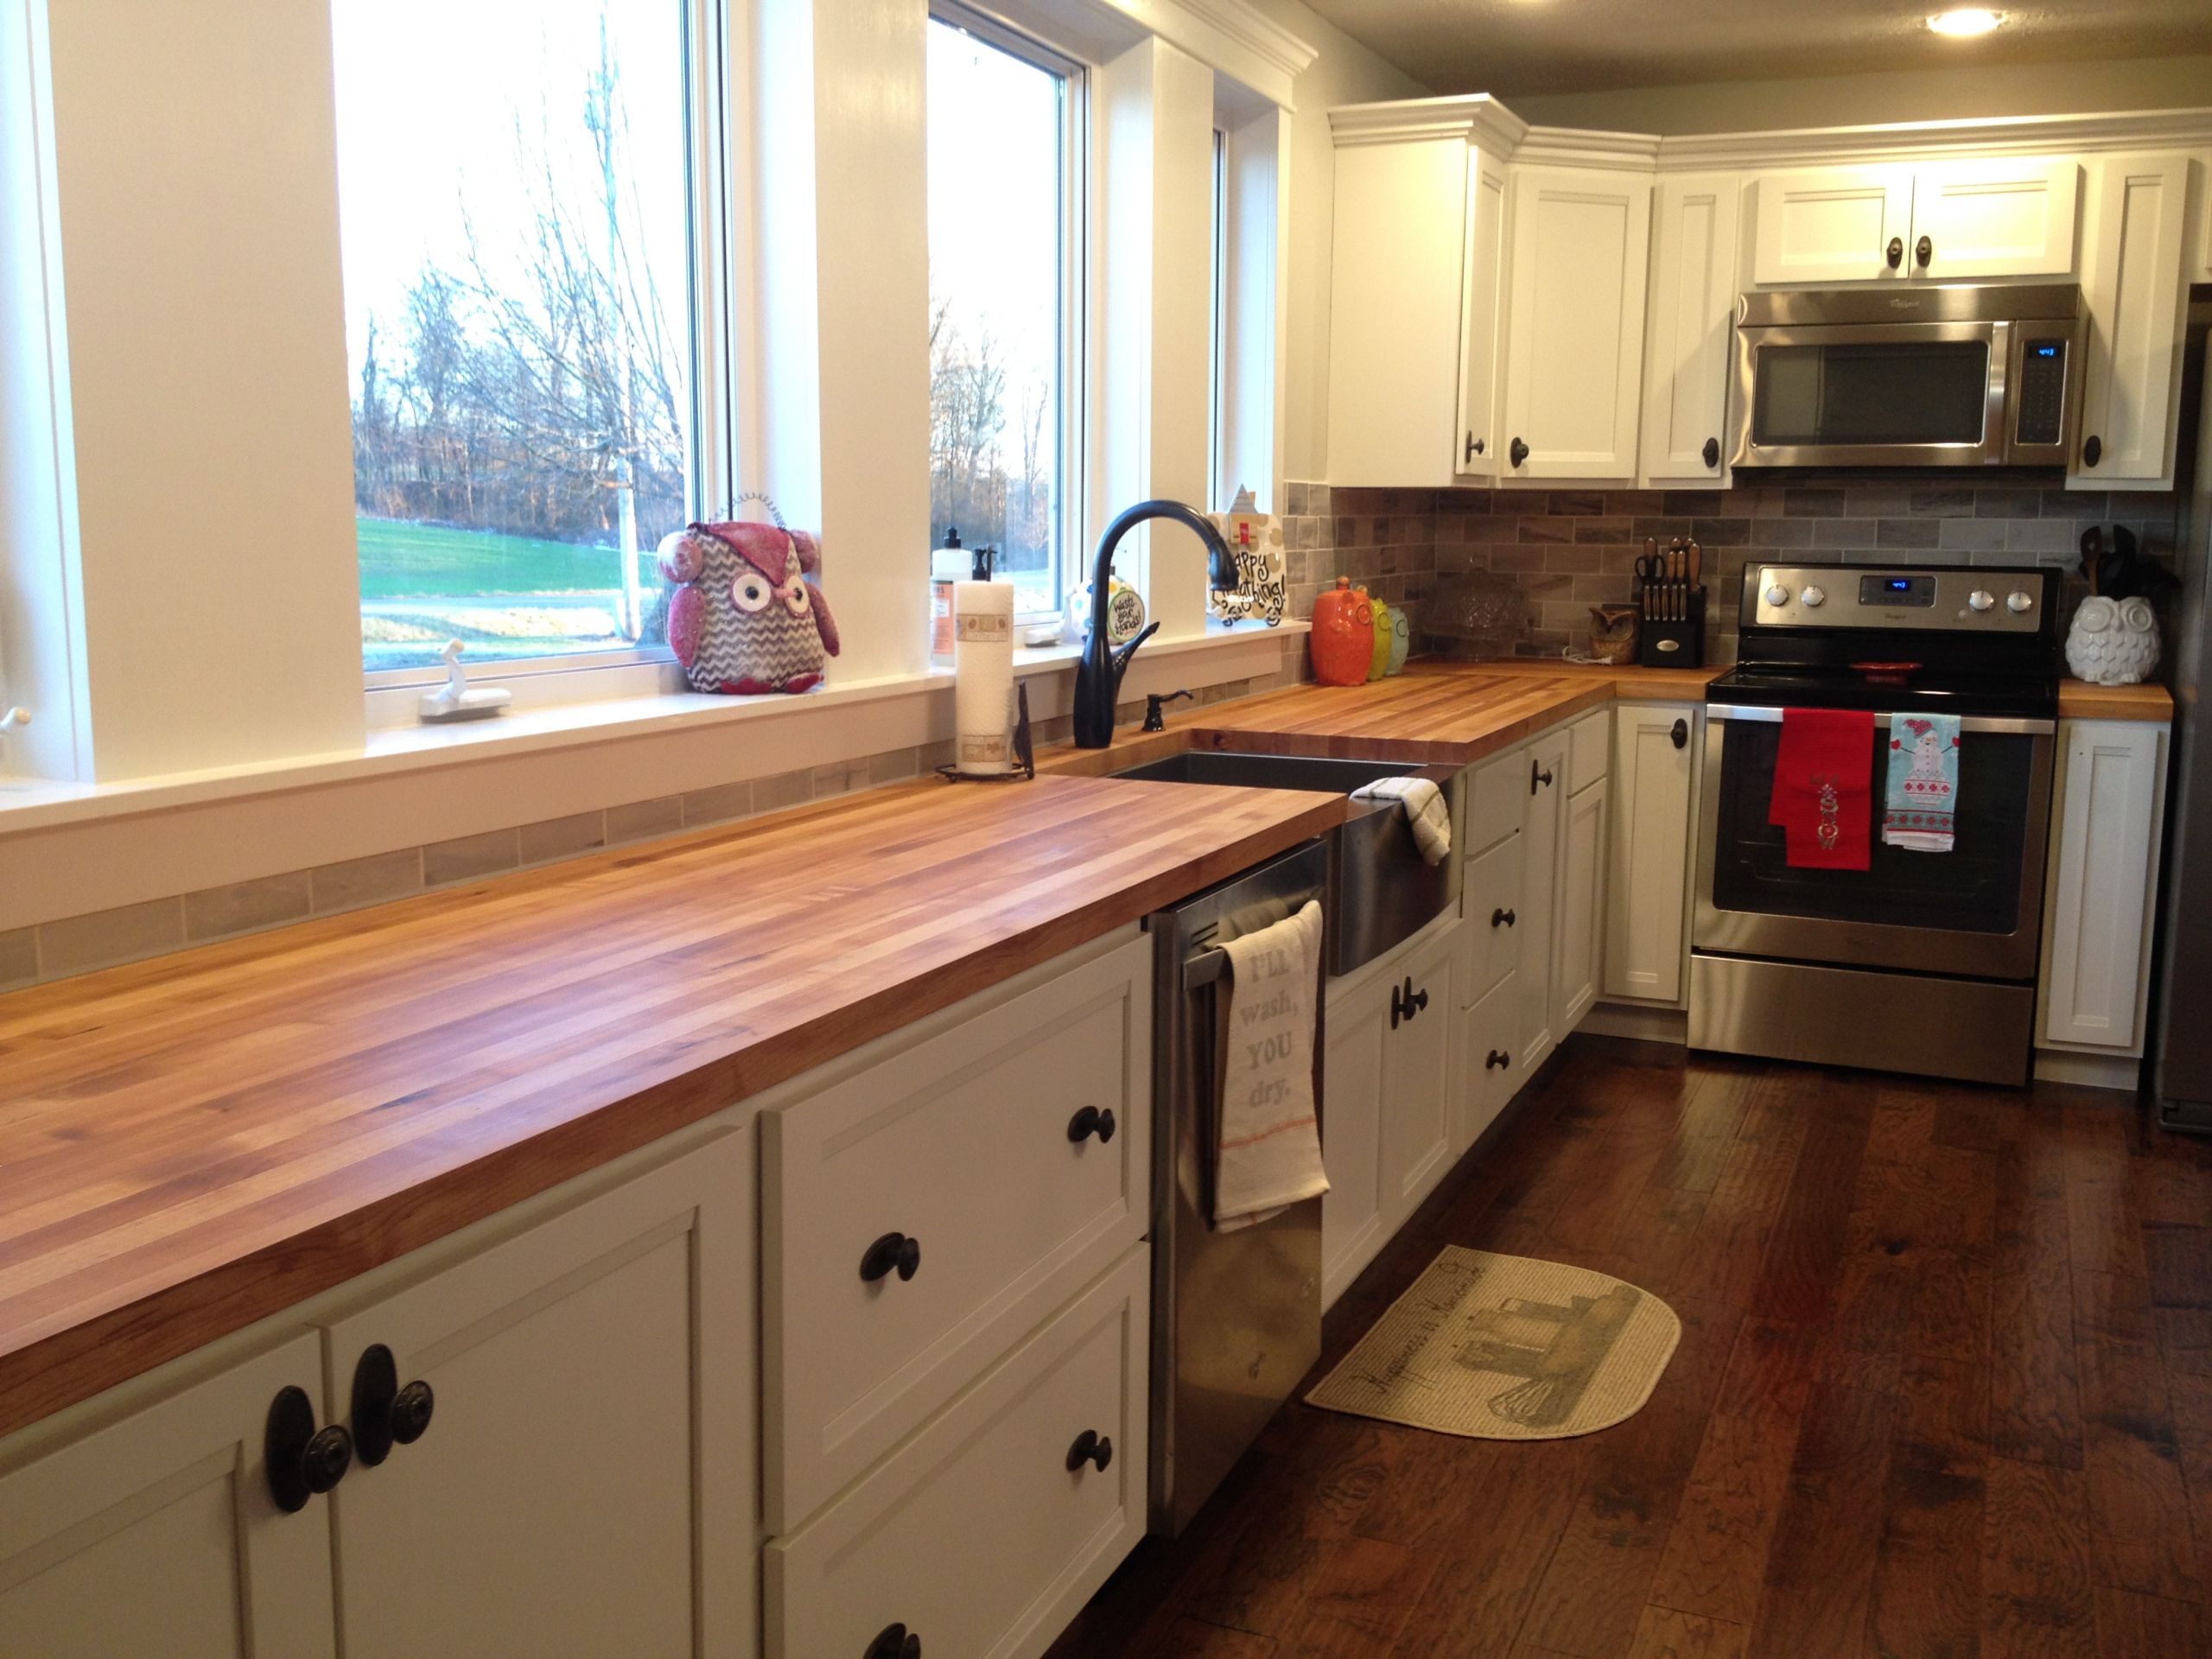 Butchers Block Kitchen Counter
 My Take on Butcher Block Countertops "Woodn t" You Like